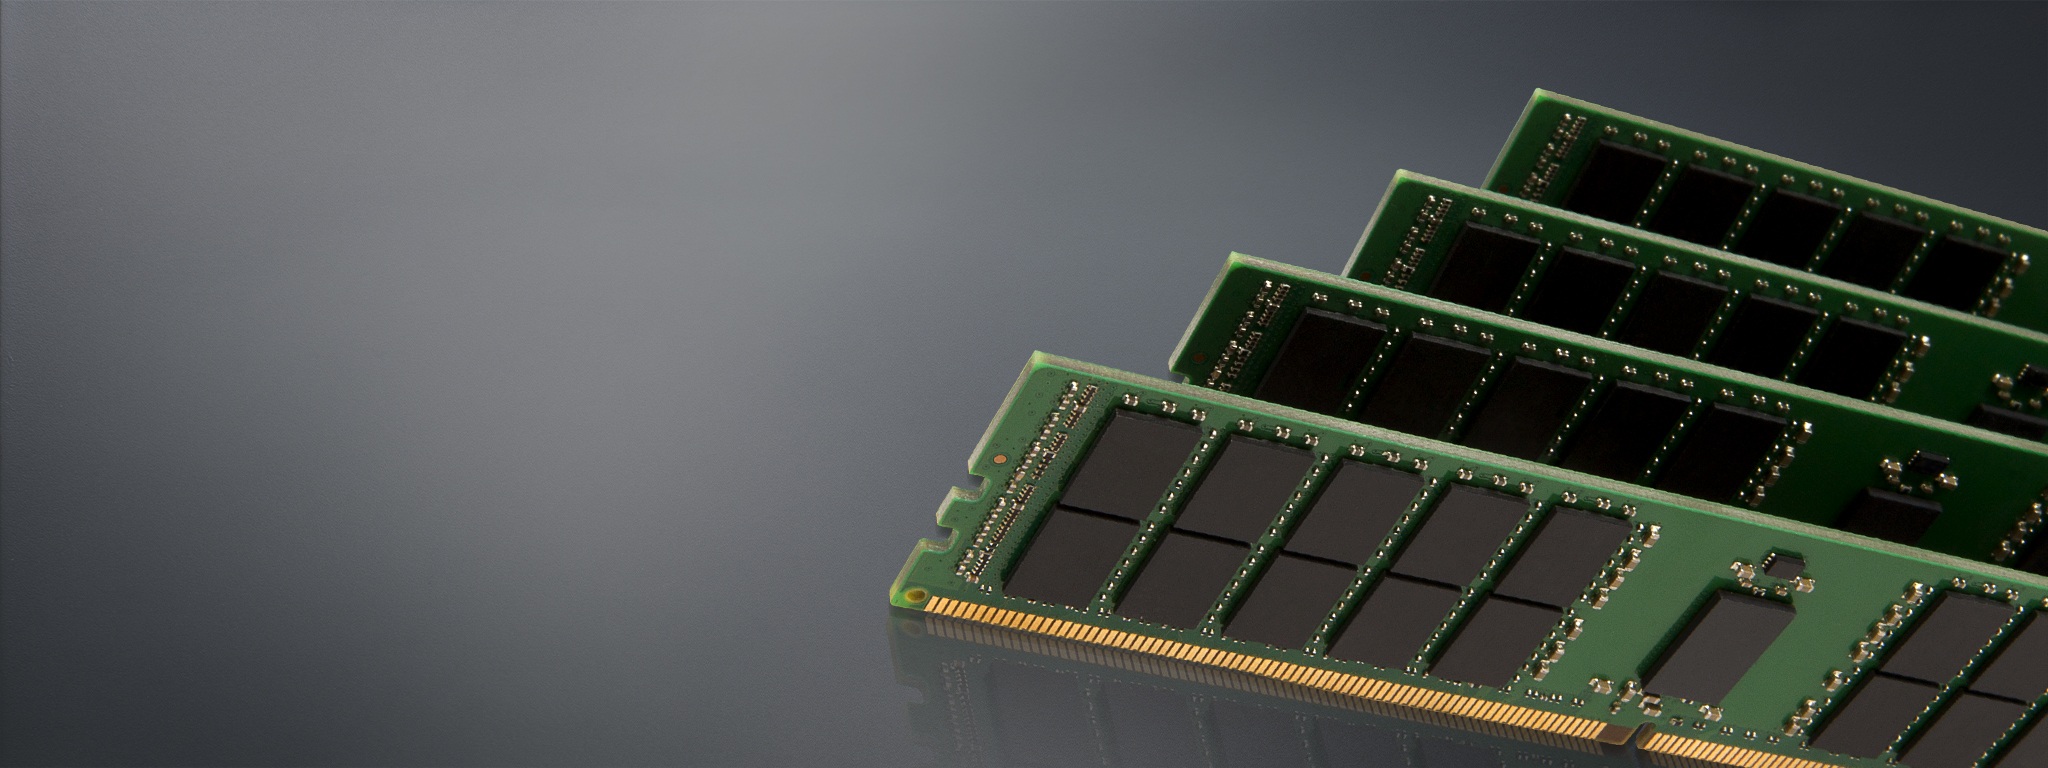 Kingston memory modules on a gray background with a reflection beneath it